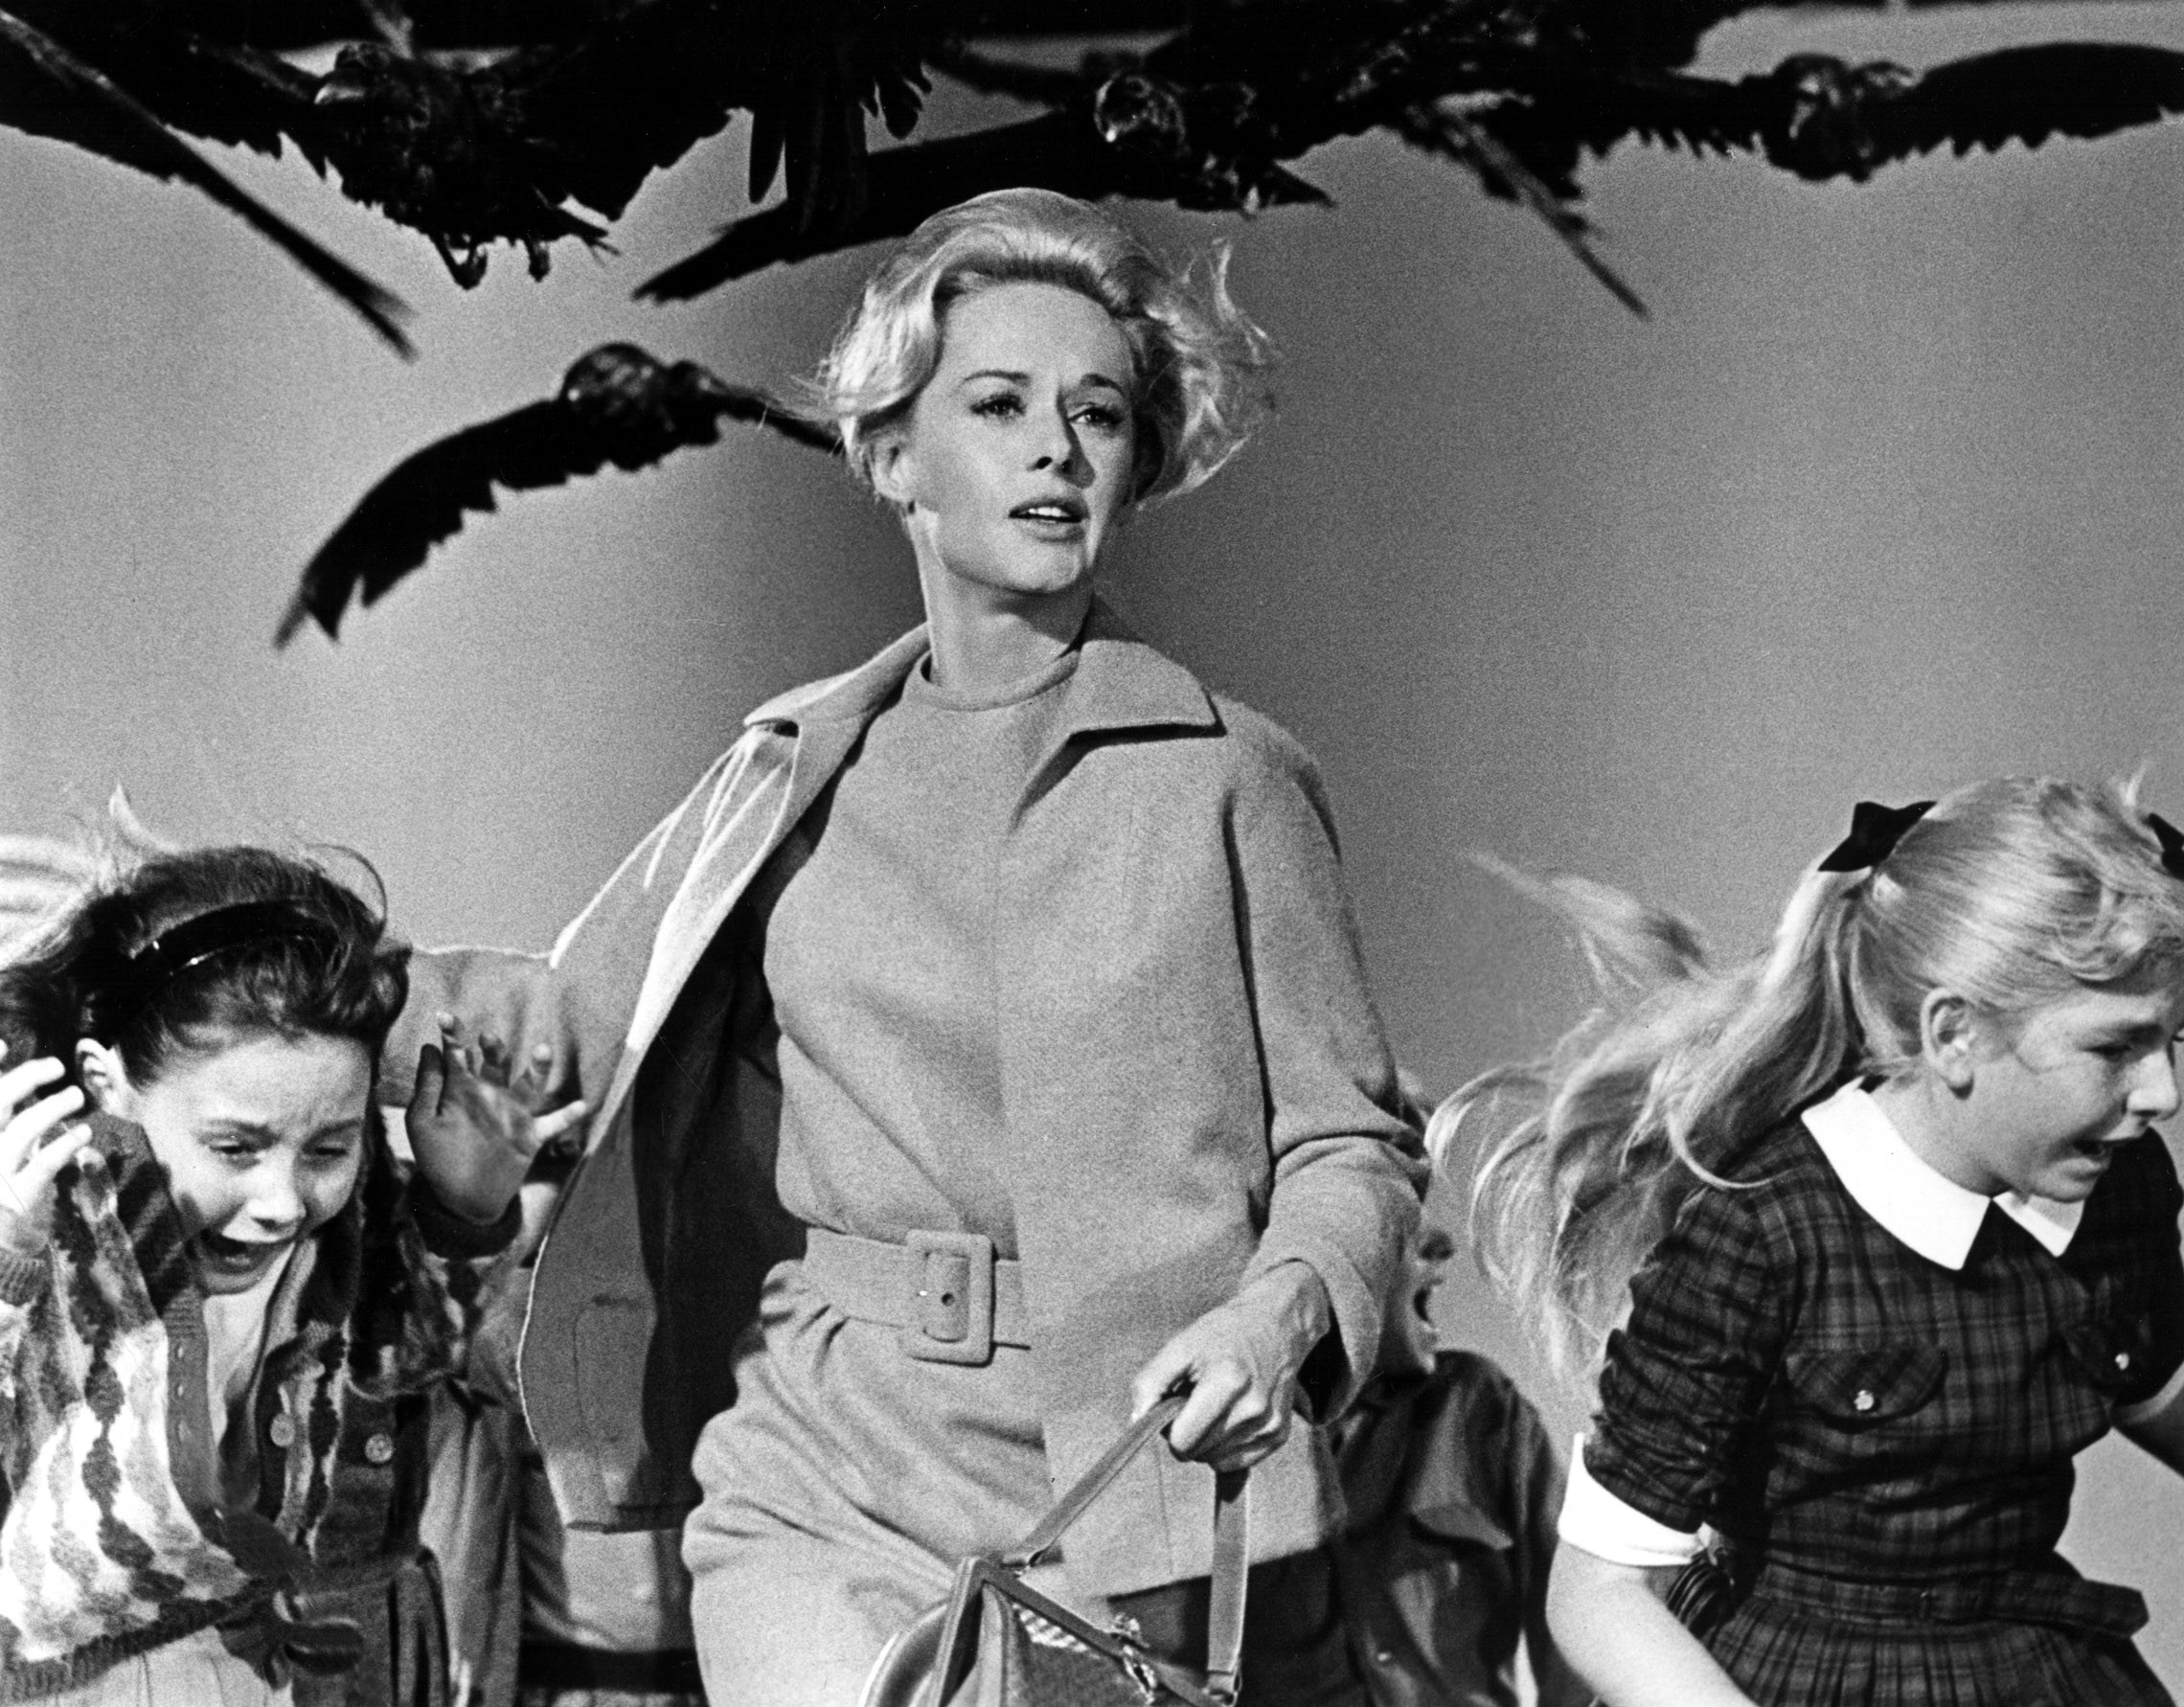 ORG XMIT: *S0418250297* Tippi Hedren in Alfred Hitchcock's 'The Birds' Email: ewade@dallasnews.com Phone: 1423 OrigName: 1161890345_0648339001161890345_0.JPG Name: Birds1.JPG Byline: Universal Pictures Submitter: erin Timestamp: 2006-10-26 14:19:05 Section: QUICK_NQ 10272006xQUICK 10072010xGUIDEDAILY 10062011xBRIEFING